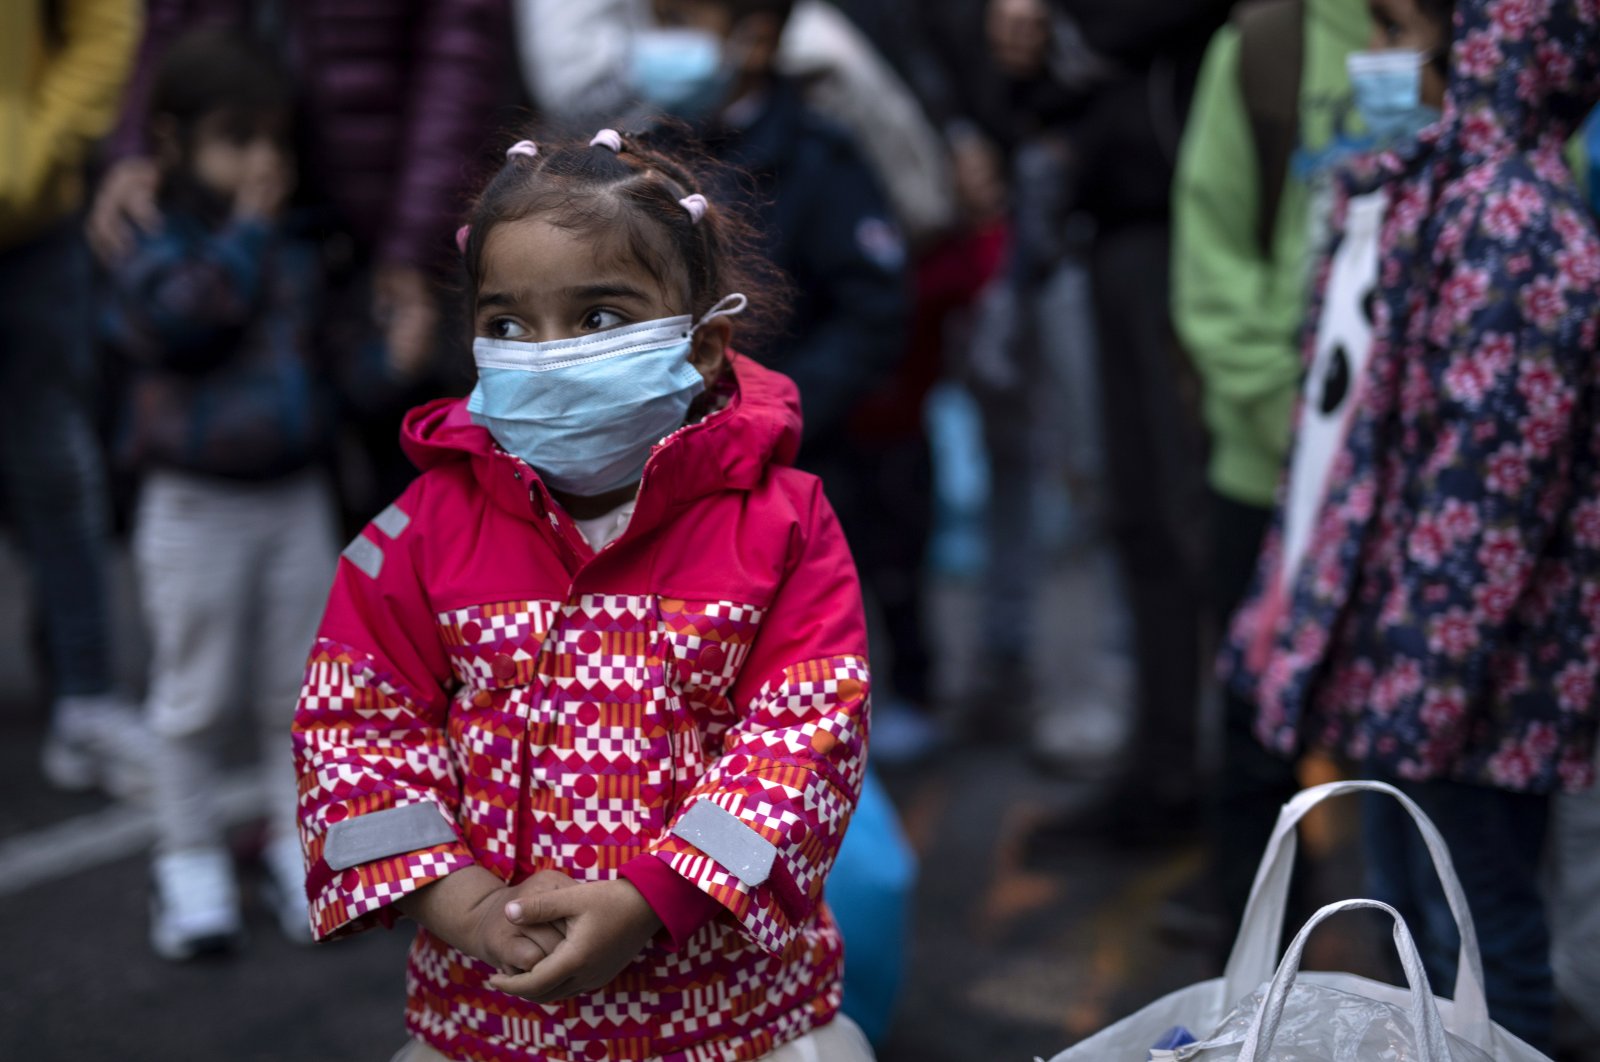 A young girl wearing a mask to prevent the spread of the coronavirus, looks on after refugees and migrants arrived at the port of Piraeus, near Athens, on Monday, May 4, 2020. (AP Photo)